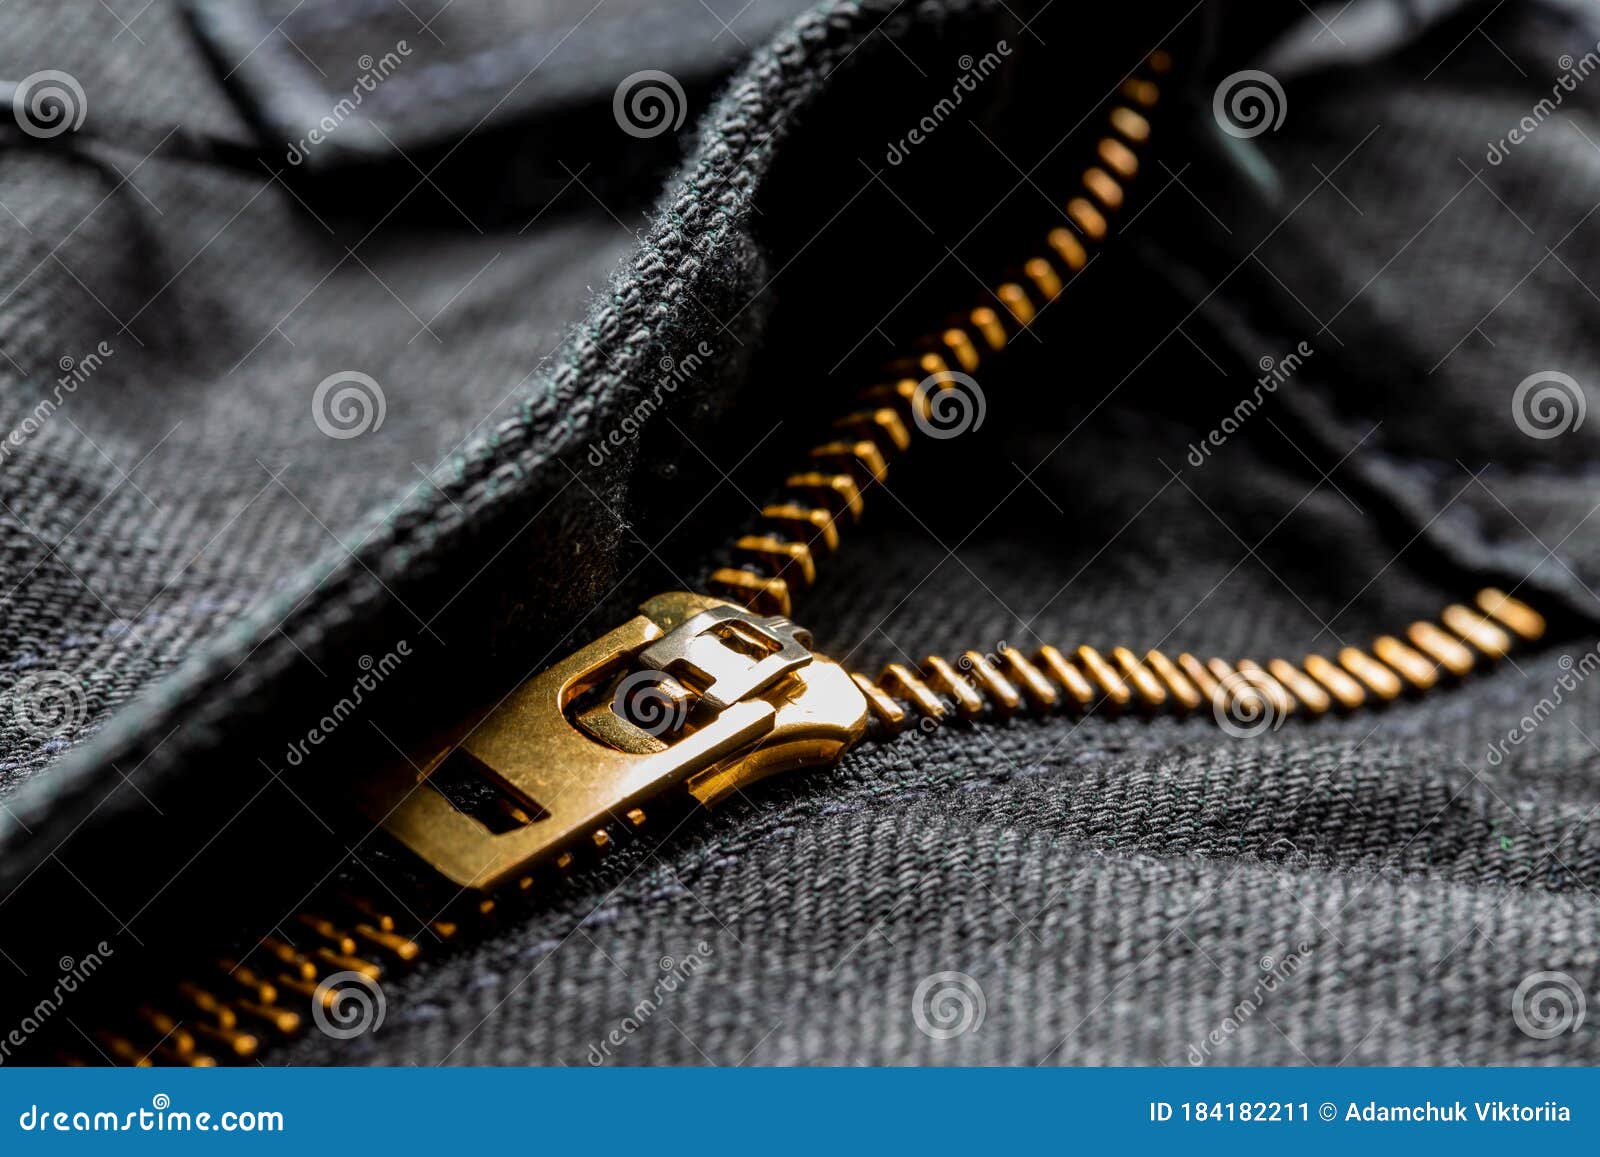 Black Jeans with Lock Zipper. Close Up Background Stock Image - Image ...